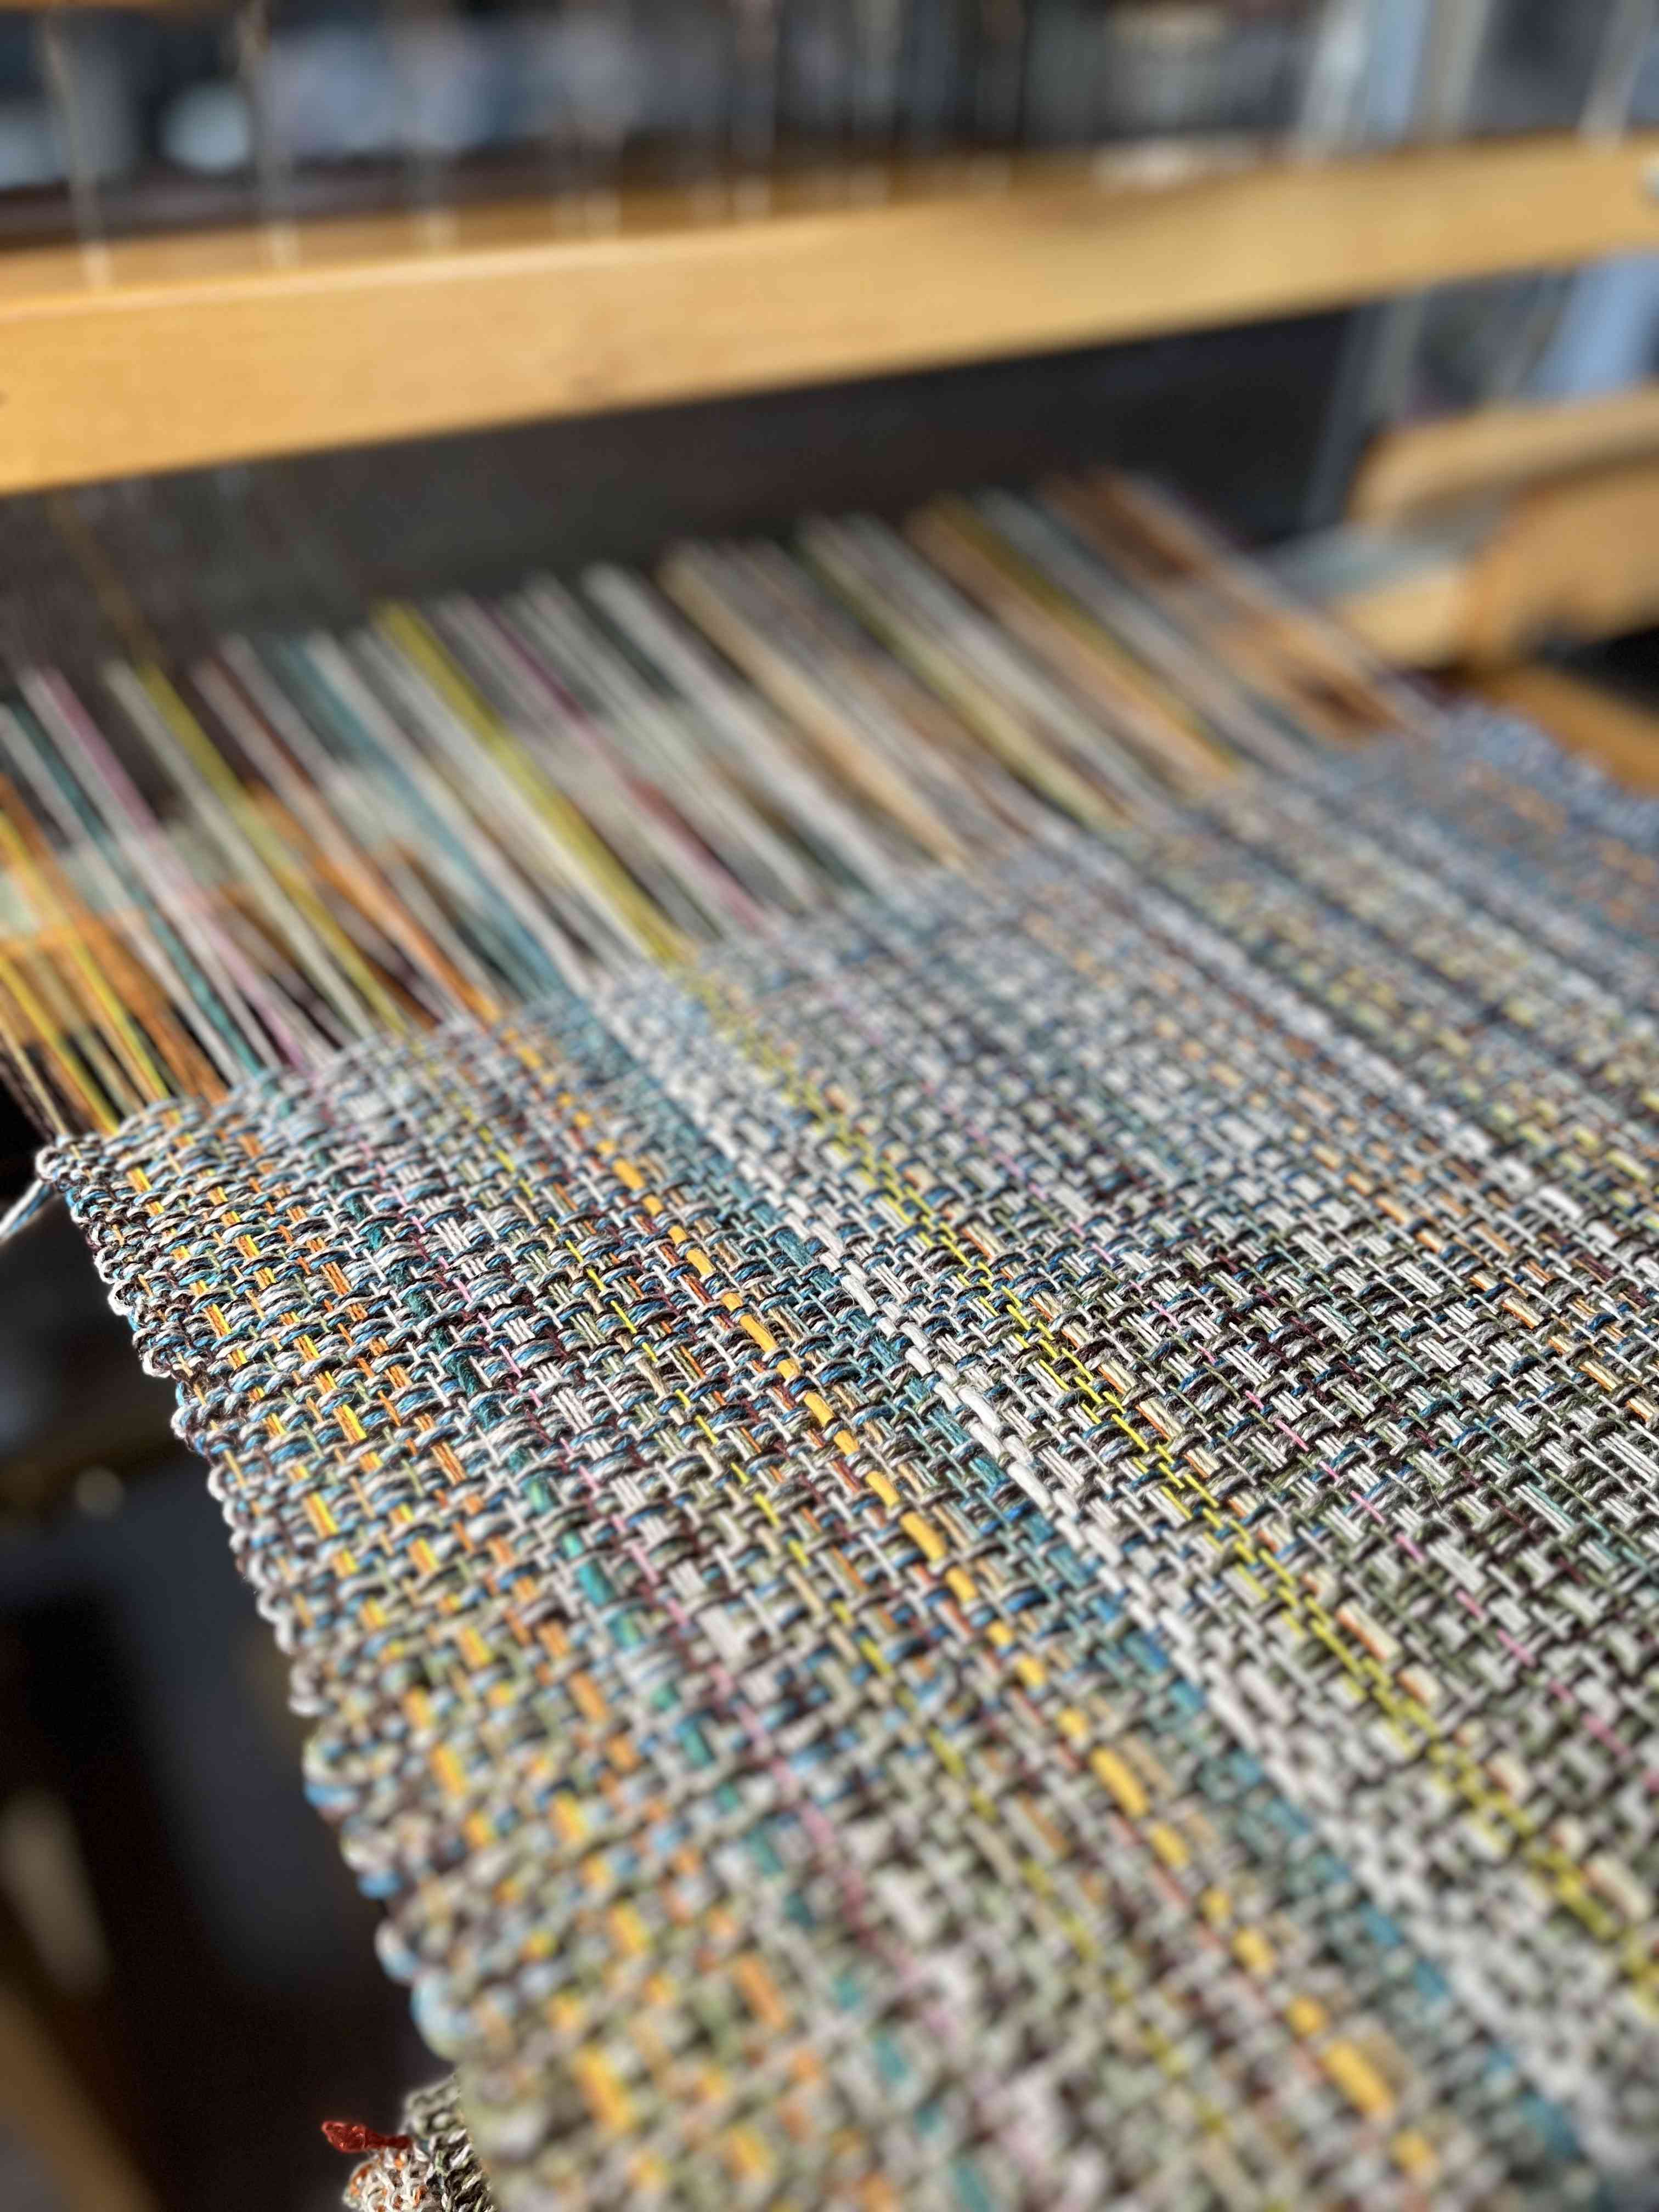 Weaving up close on the loom